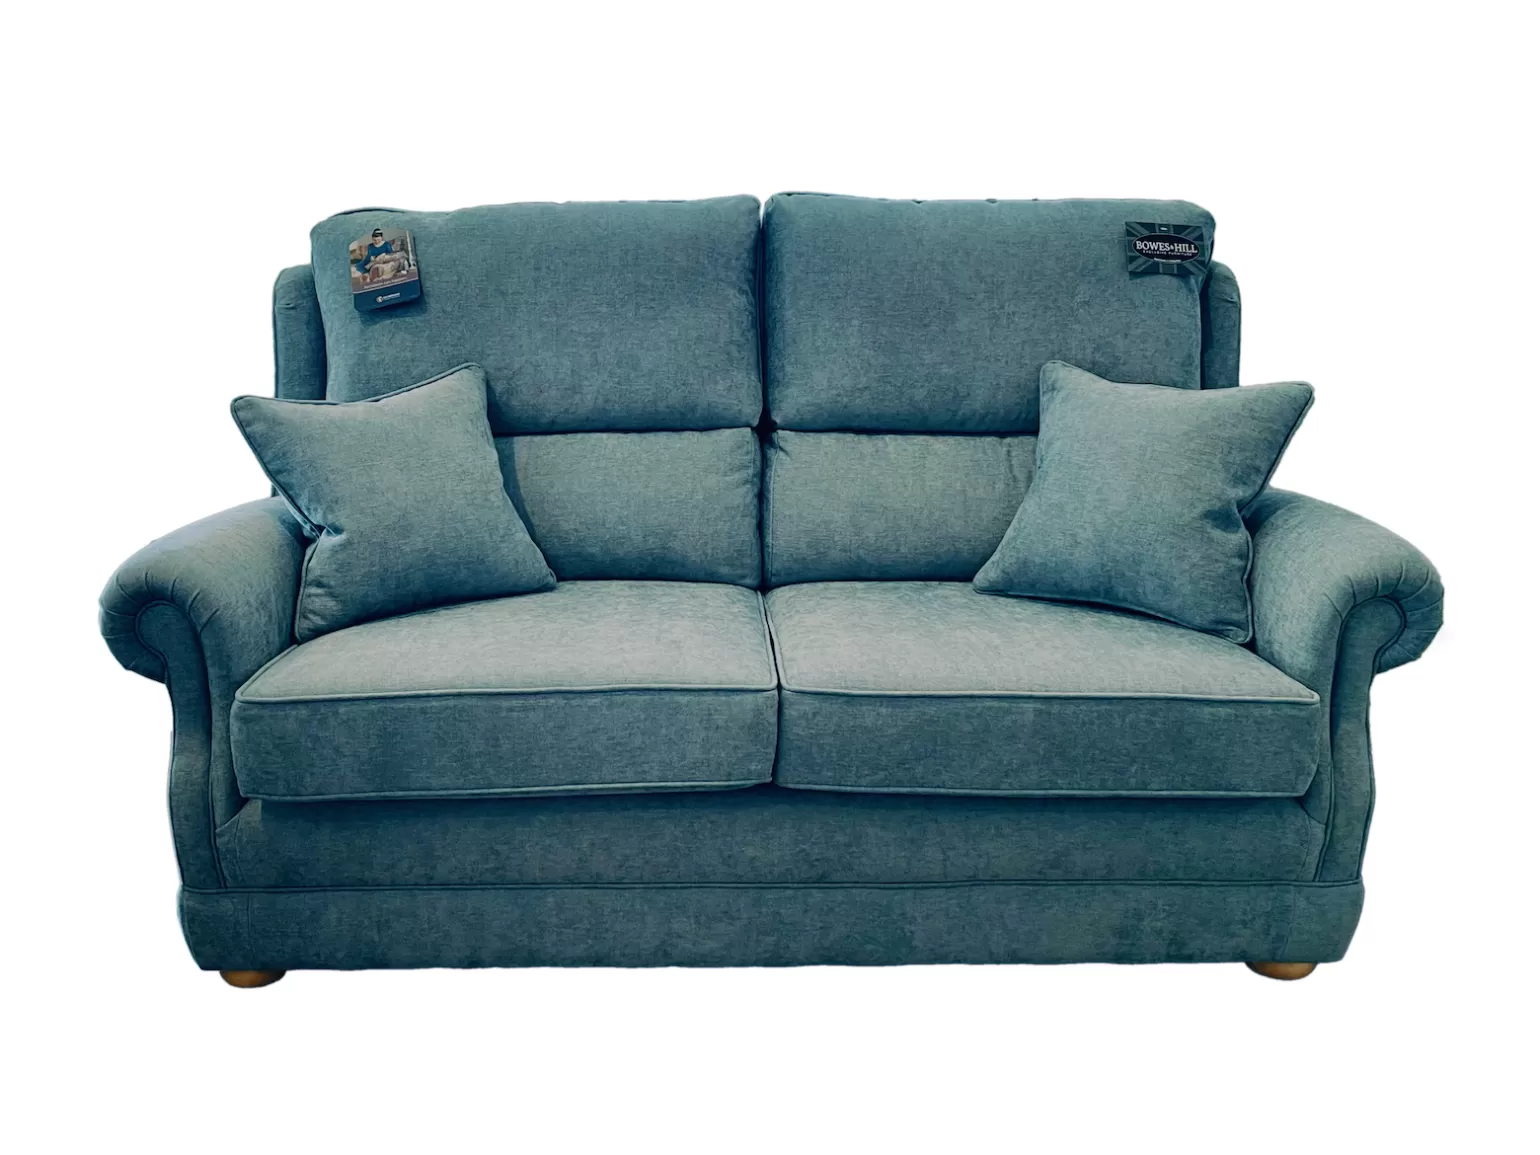 Our most popular and traditionally designed range of sofas and chairs providing the ultimate in comfort and style. The high backs are supported with wings, and extra lumbar support is given with a split back cushion. The Windsor is a favourite choice, and has a lot of attention to detail.
